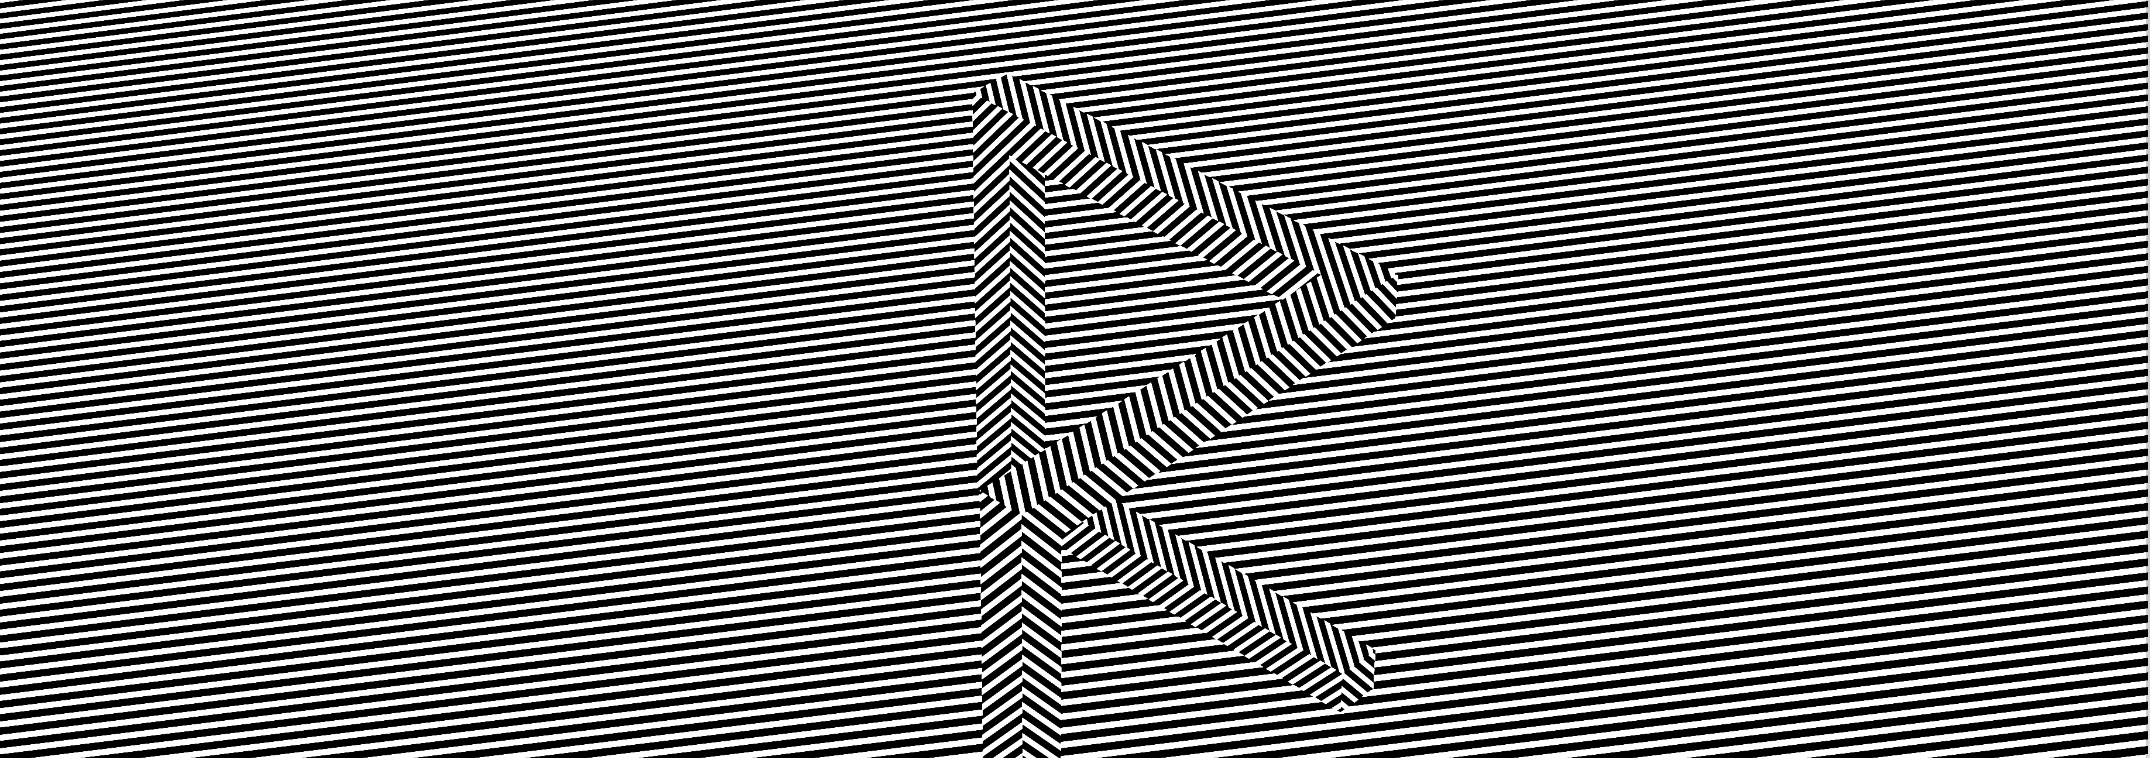 The image consists of black and white stripes, in which a black and white striped "R" can be seen